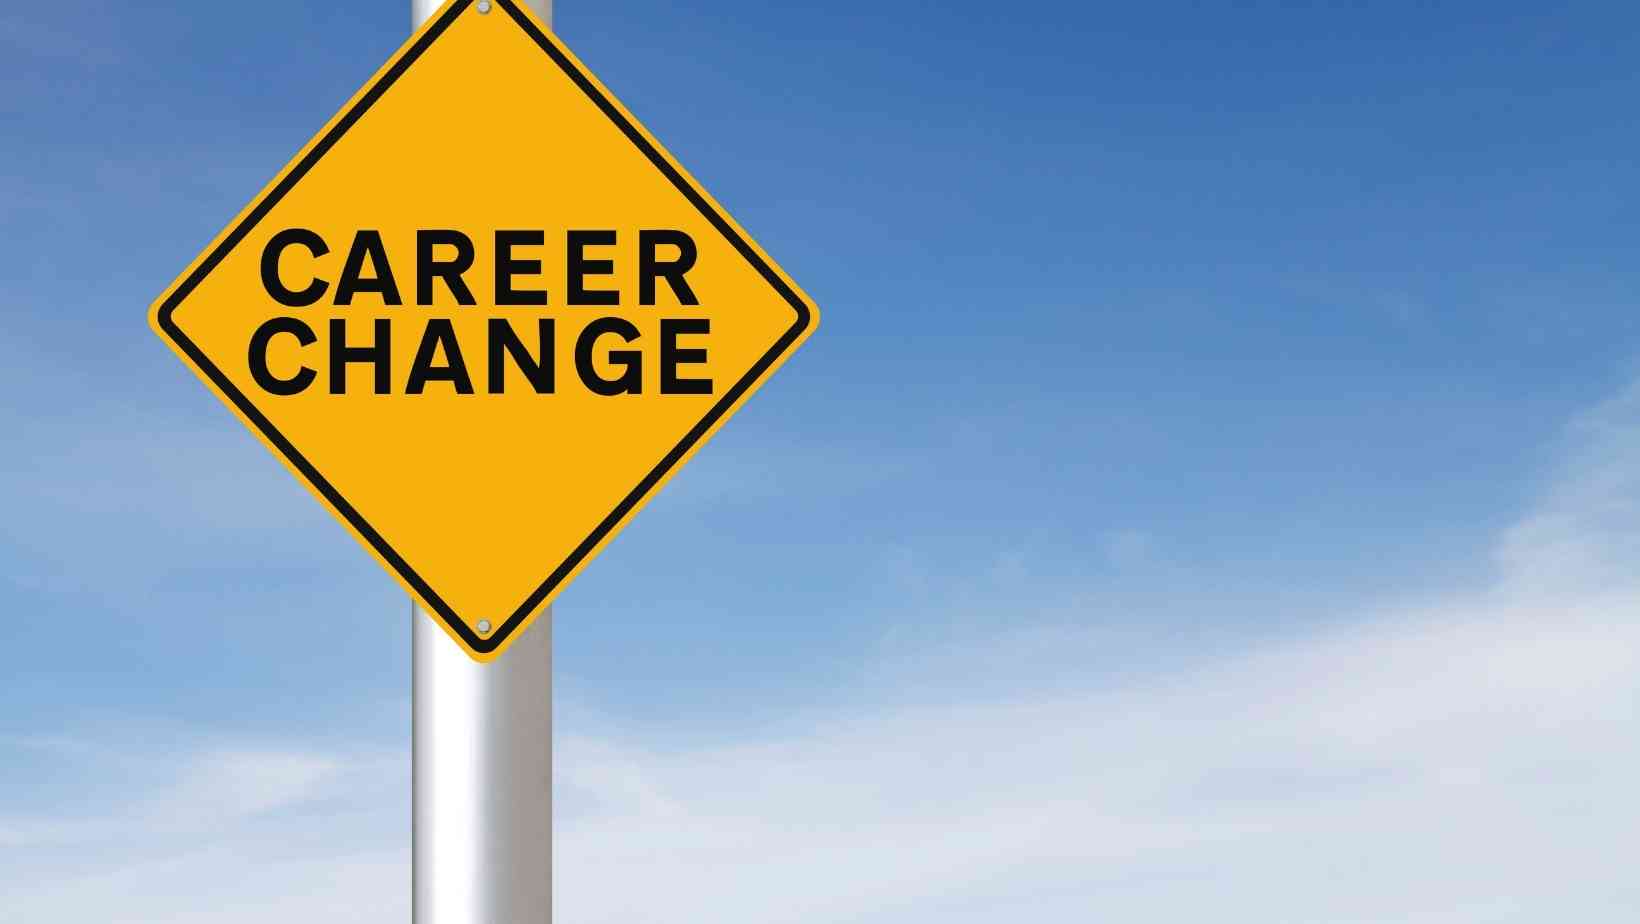 If you think it's time for a change, it's worth exploring new career paths in different industries where your skills and experience can be put to good use.